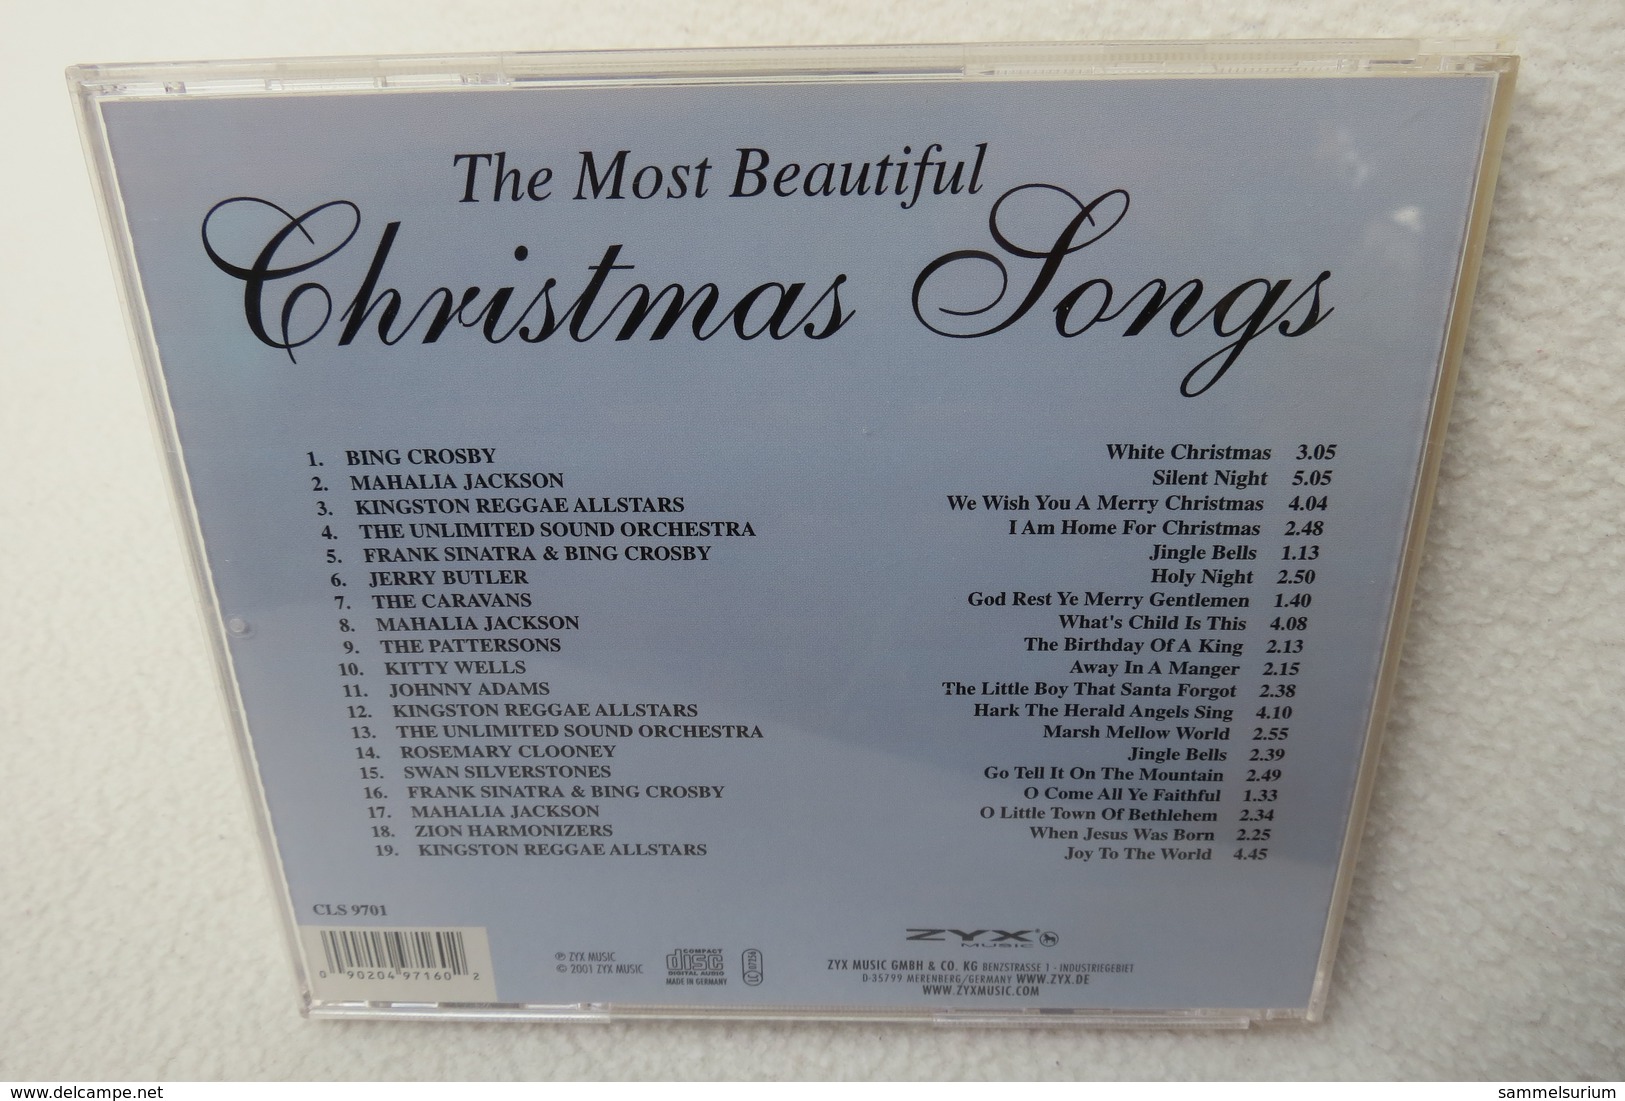 CD "The Most Beautiful ChristmasvSongs" - Weihnachtslieder